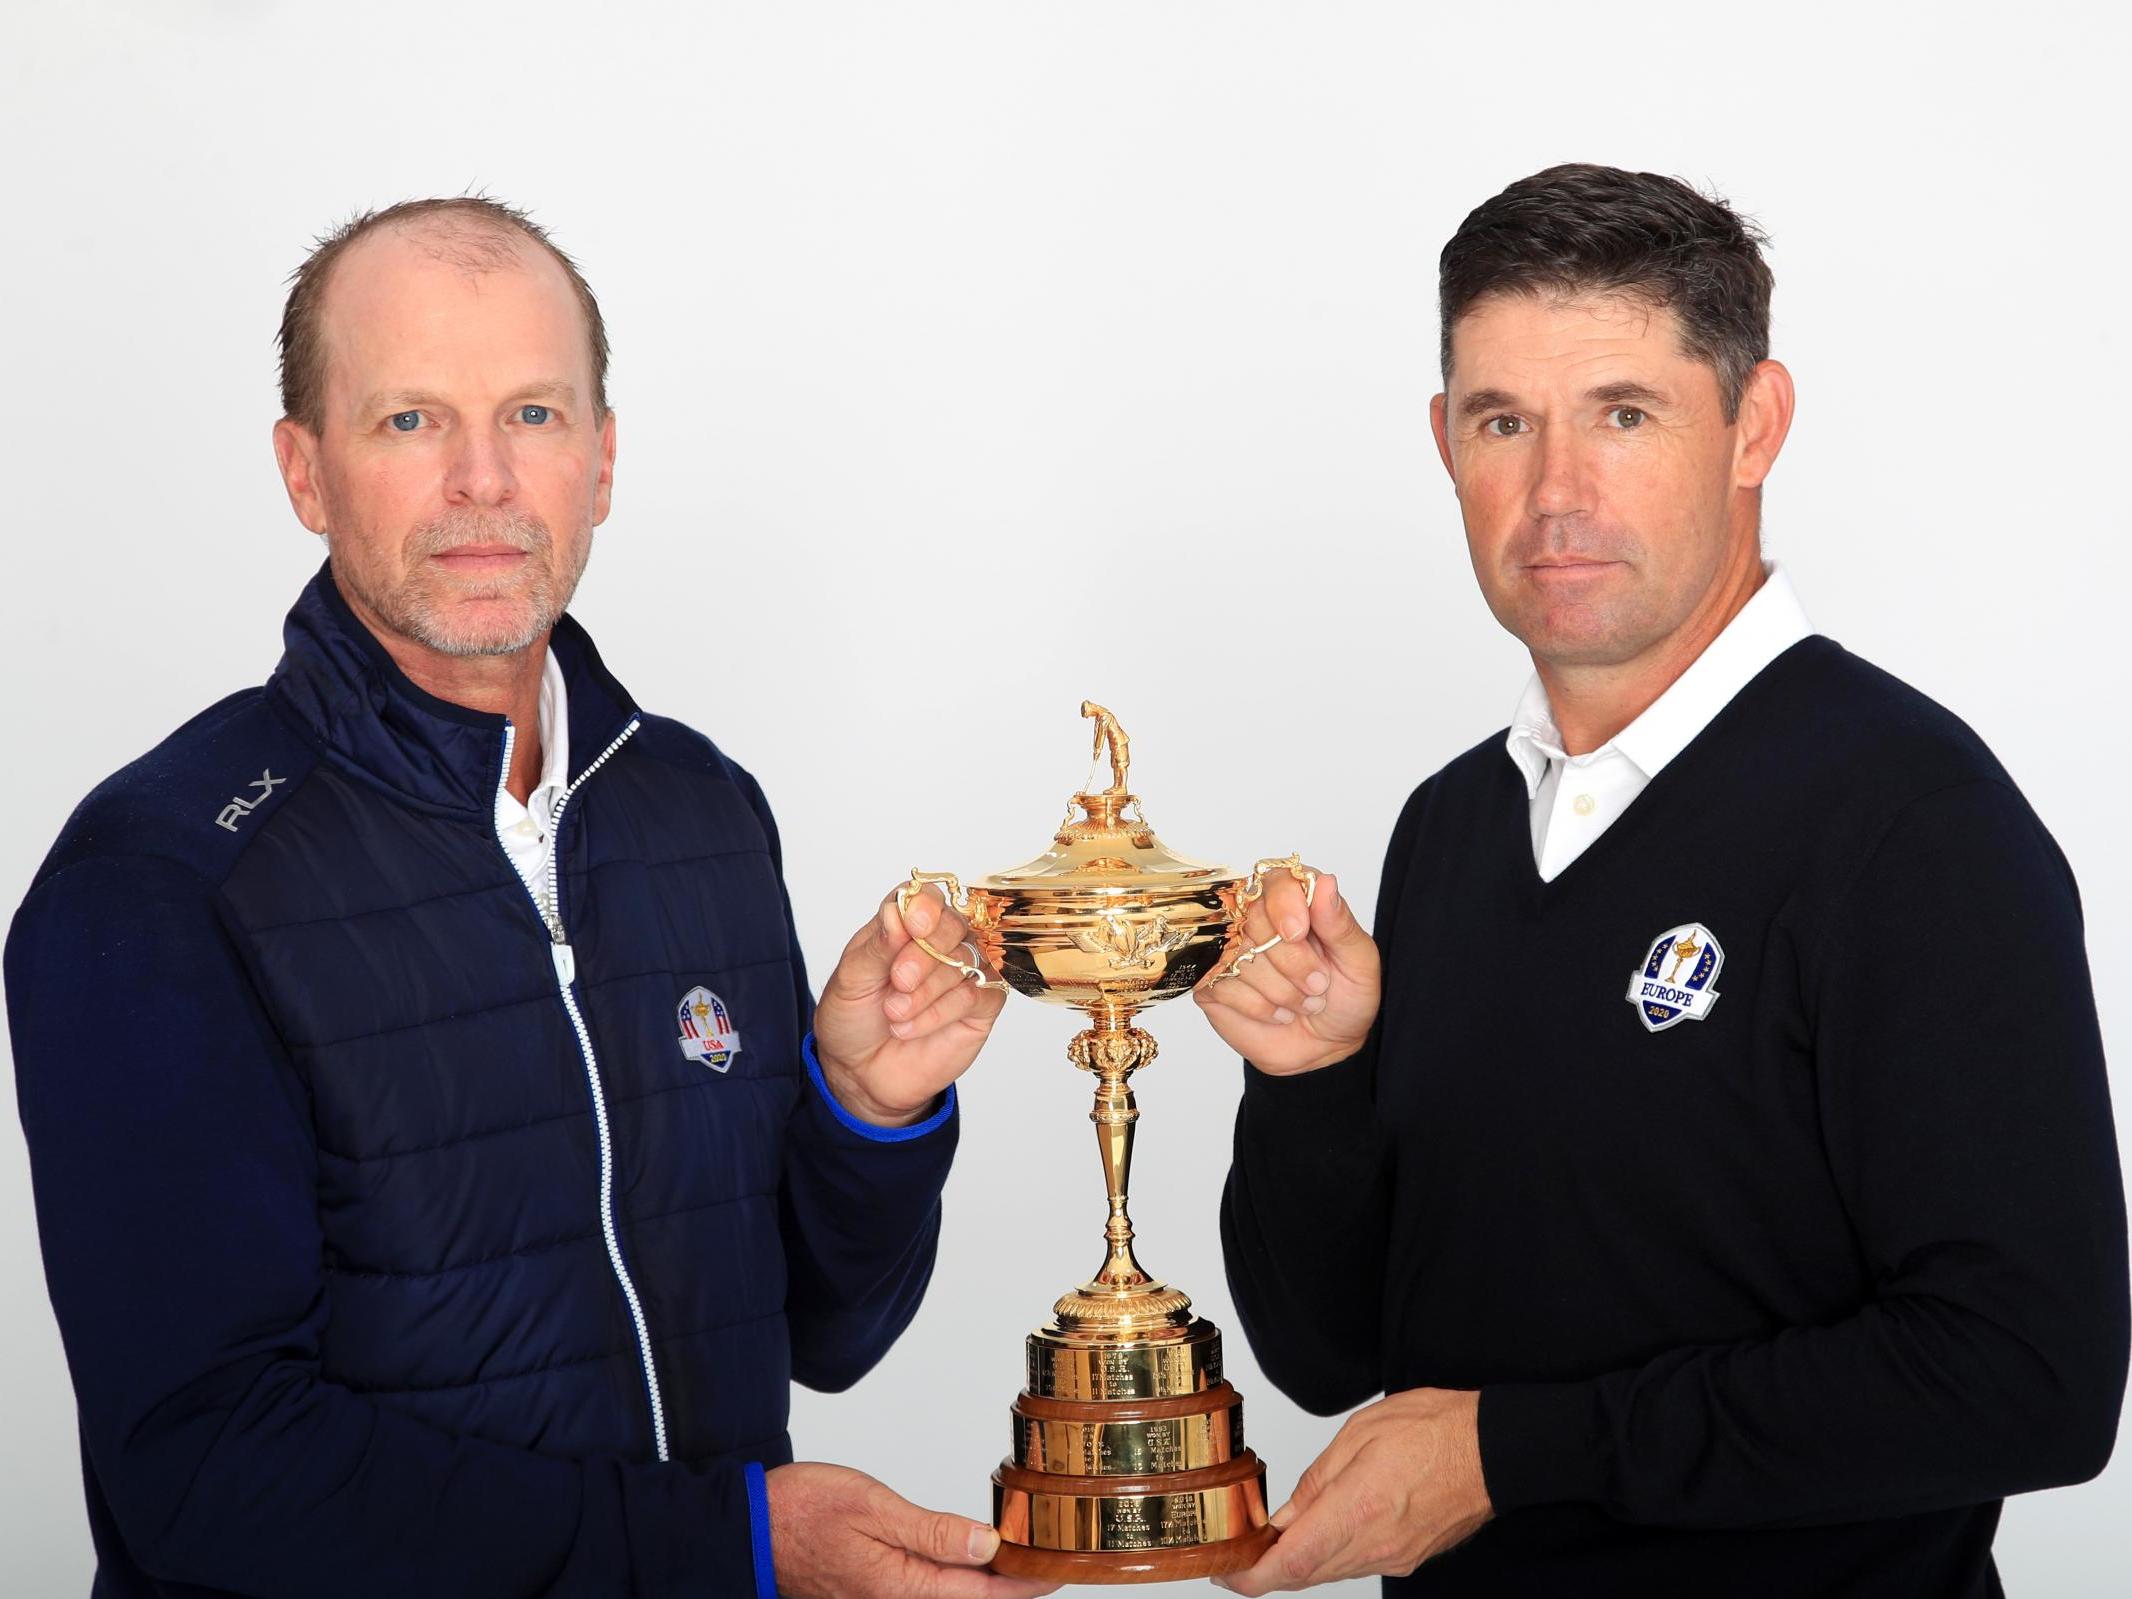 Stricker and Harrington have underlined the Ryder Cup values